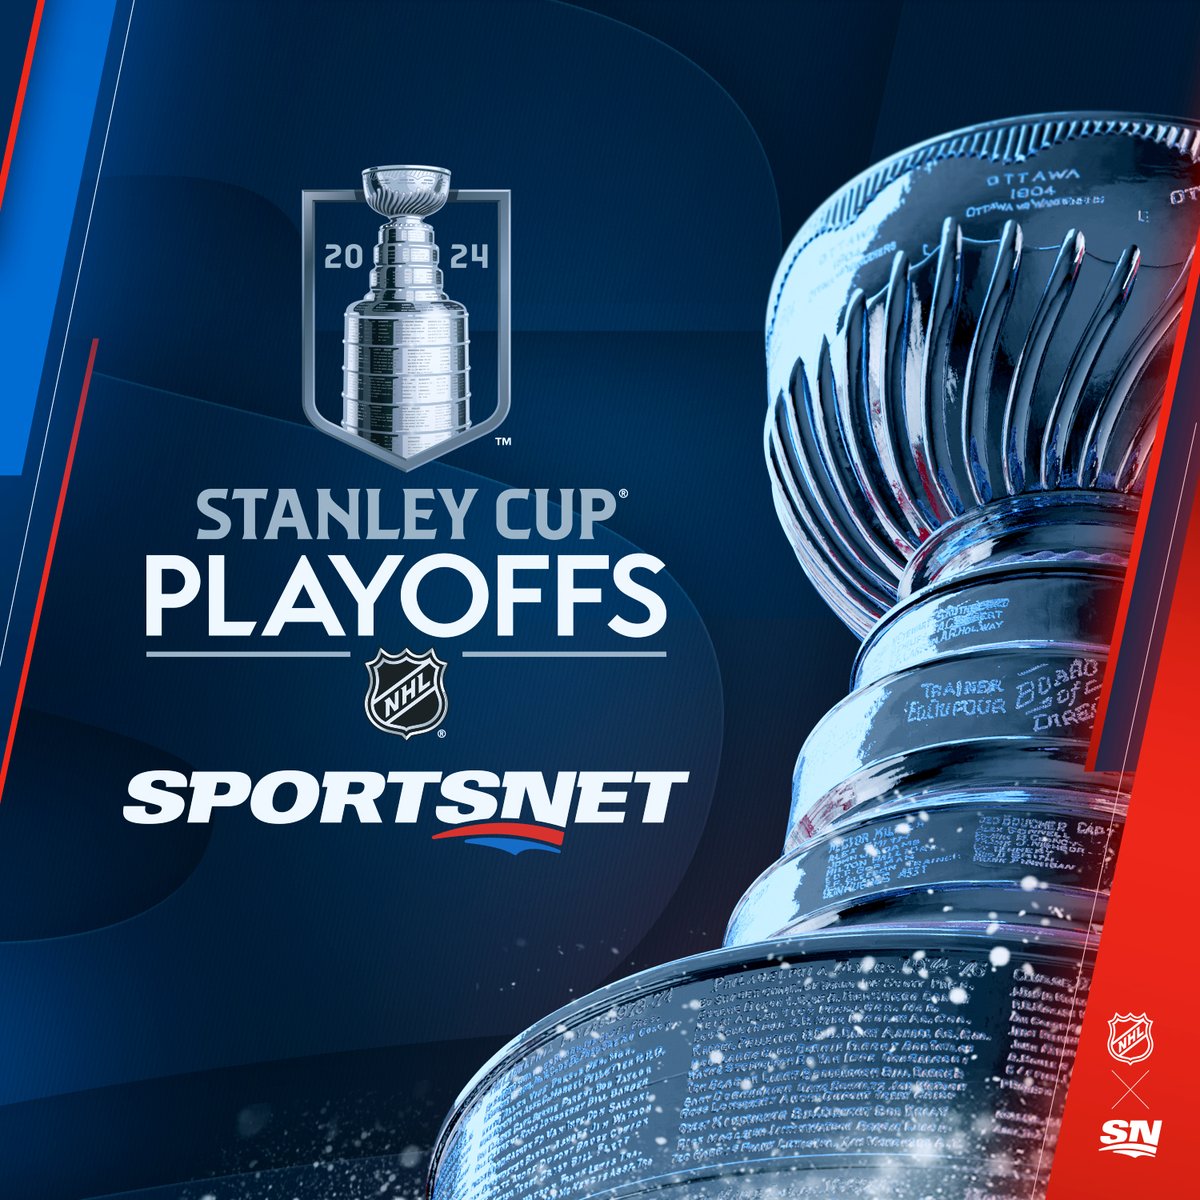 Be here for the intensity. Be here for the history. Be here for the Cup. 🏆 Your front-row seat awaits! Add Sportsnet to your TV lineup now and don’t miss a minute of the Stanley Cup Playoffs. #Sportsnet #StanleyCup